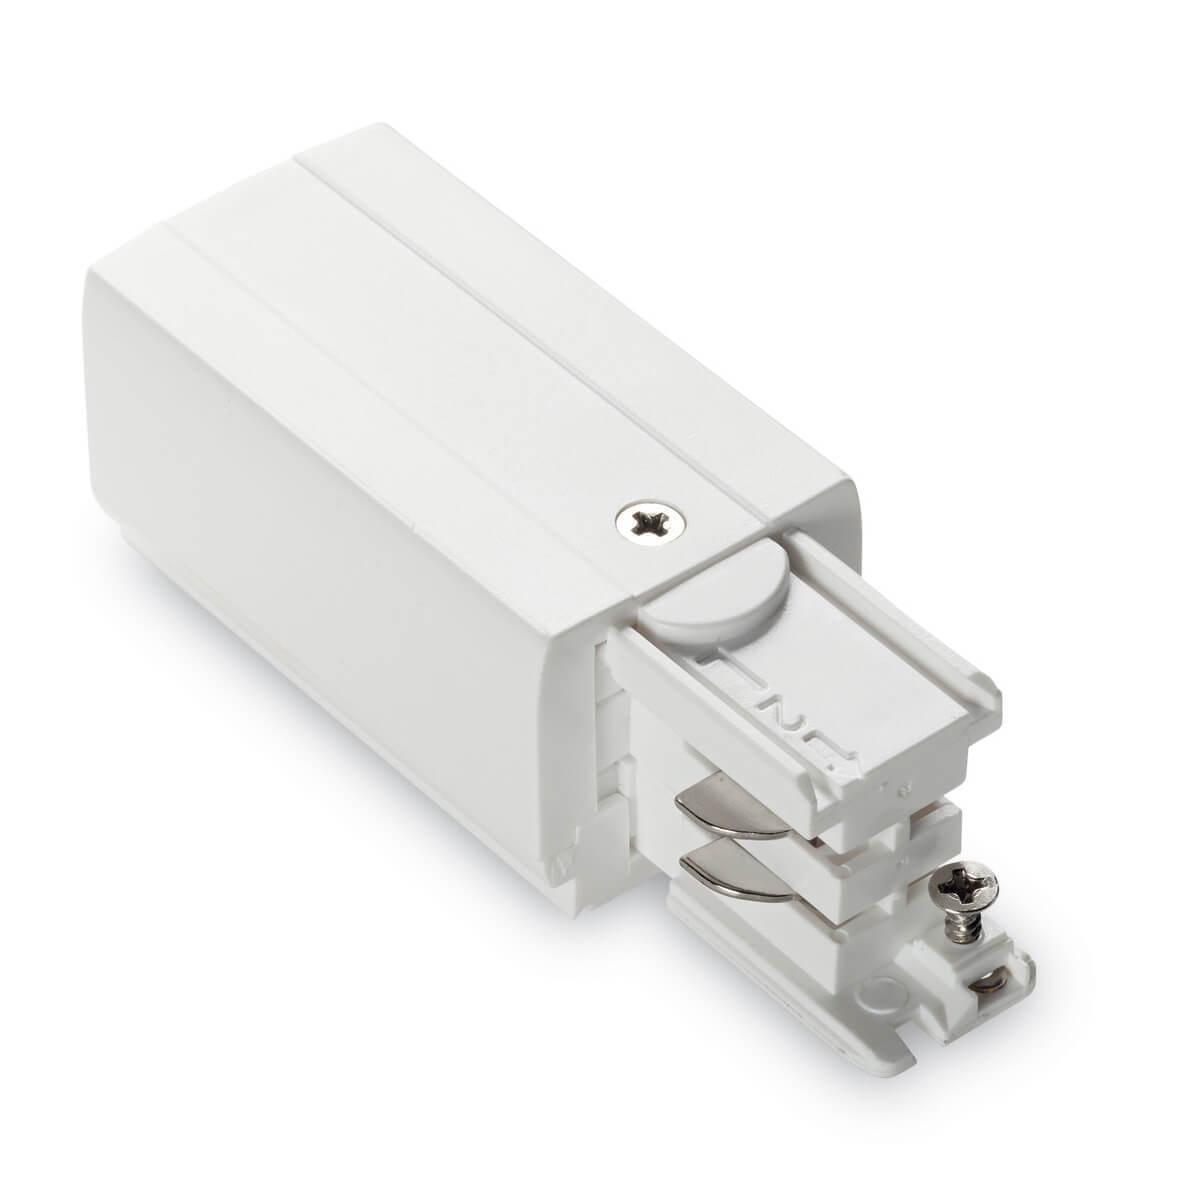   Ideal Lux Link Trimless Main Connect Le Wh On-Off 169583